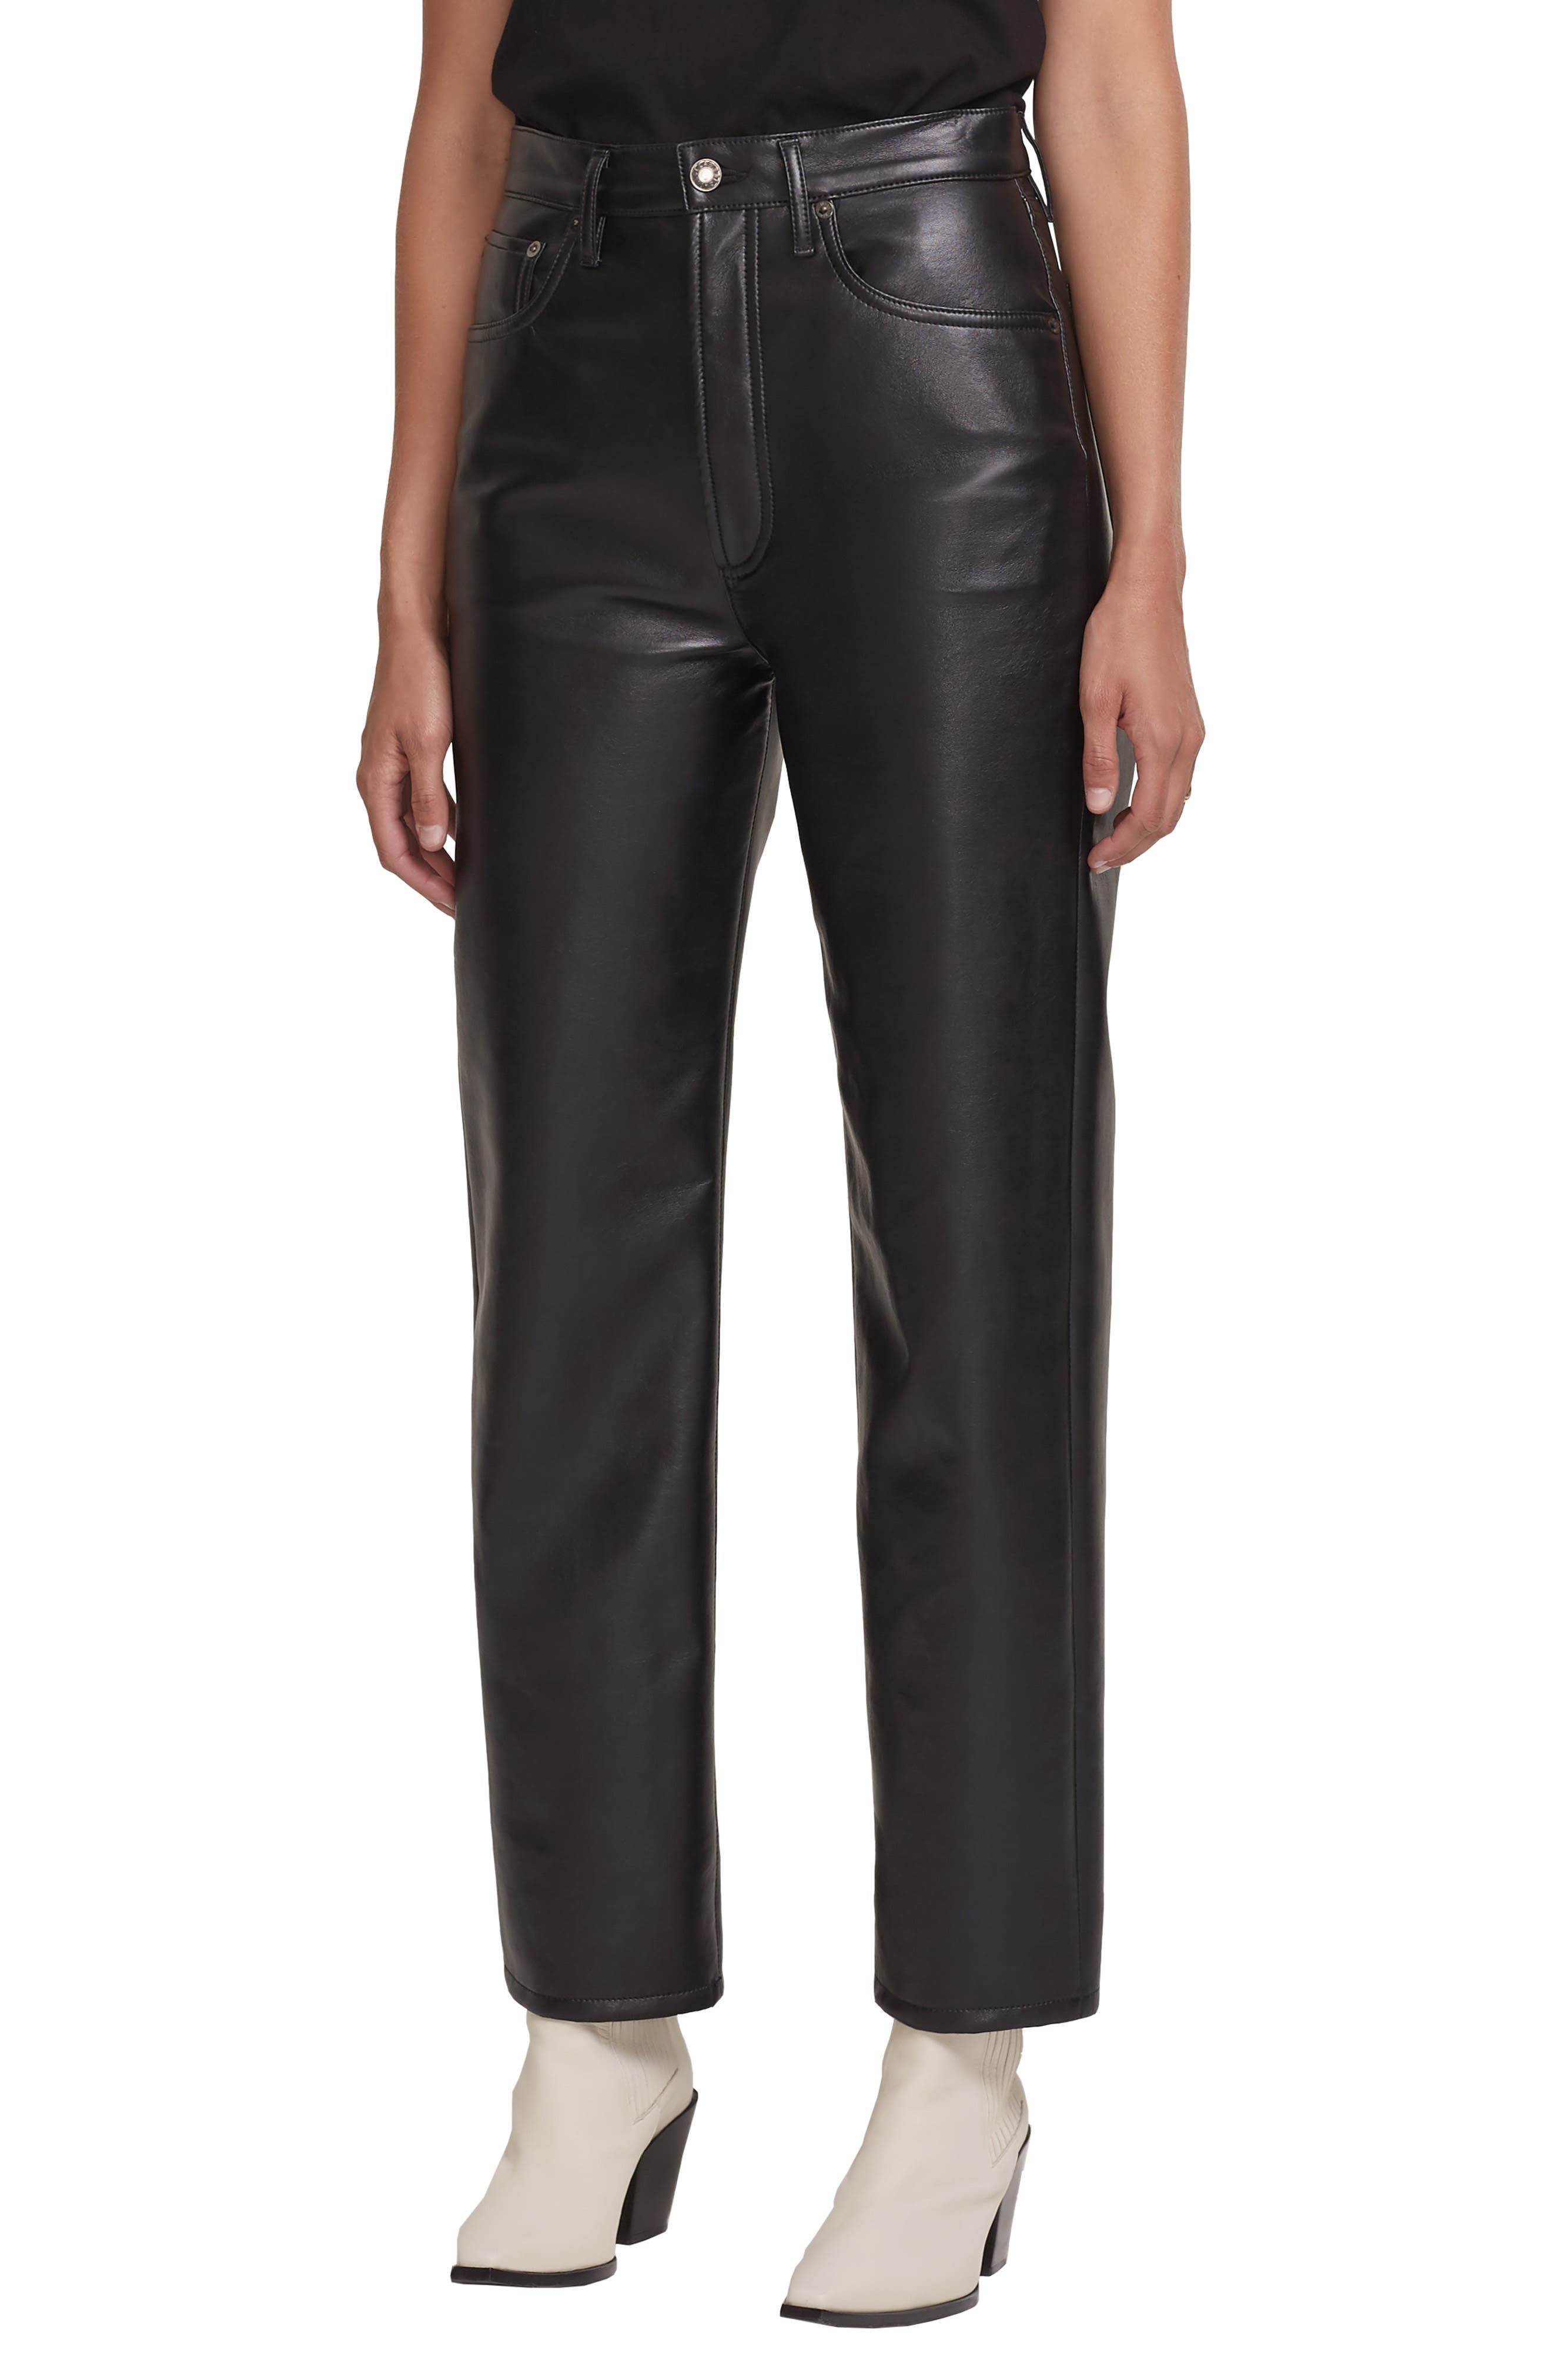 AGOLDE '90s Pinch Waist Recycled Leather High Waist Pants in Powder at Nordstrom